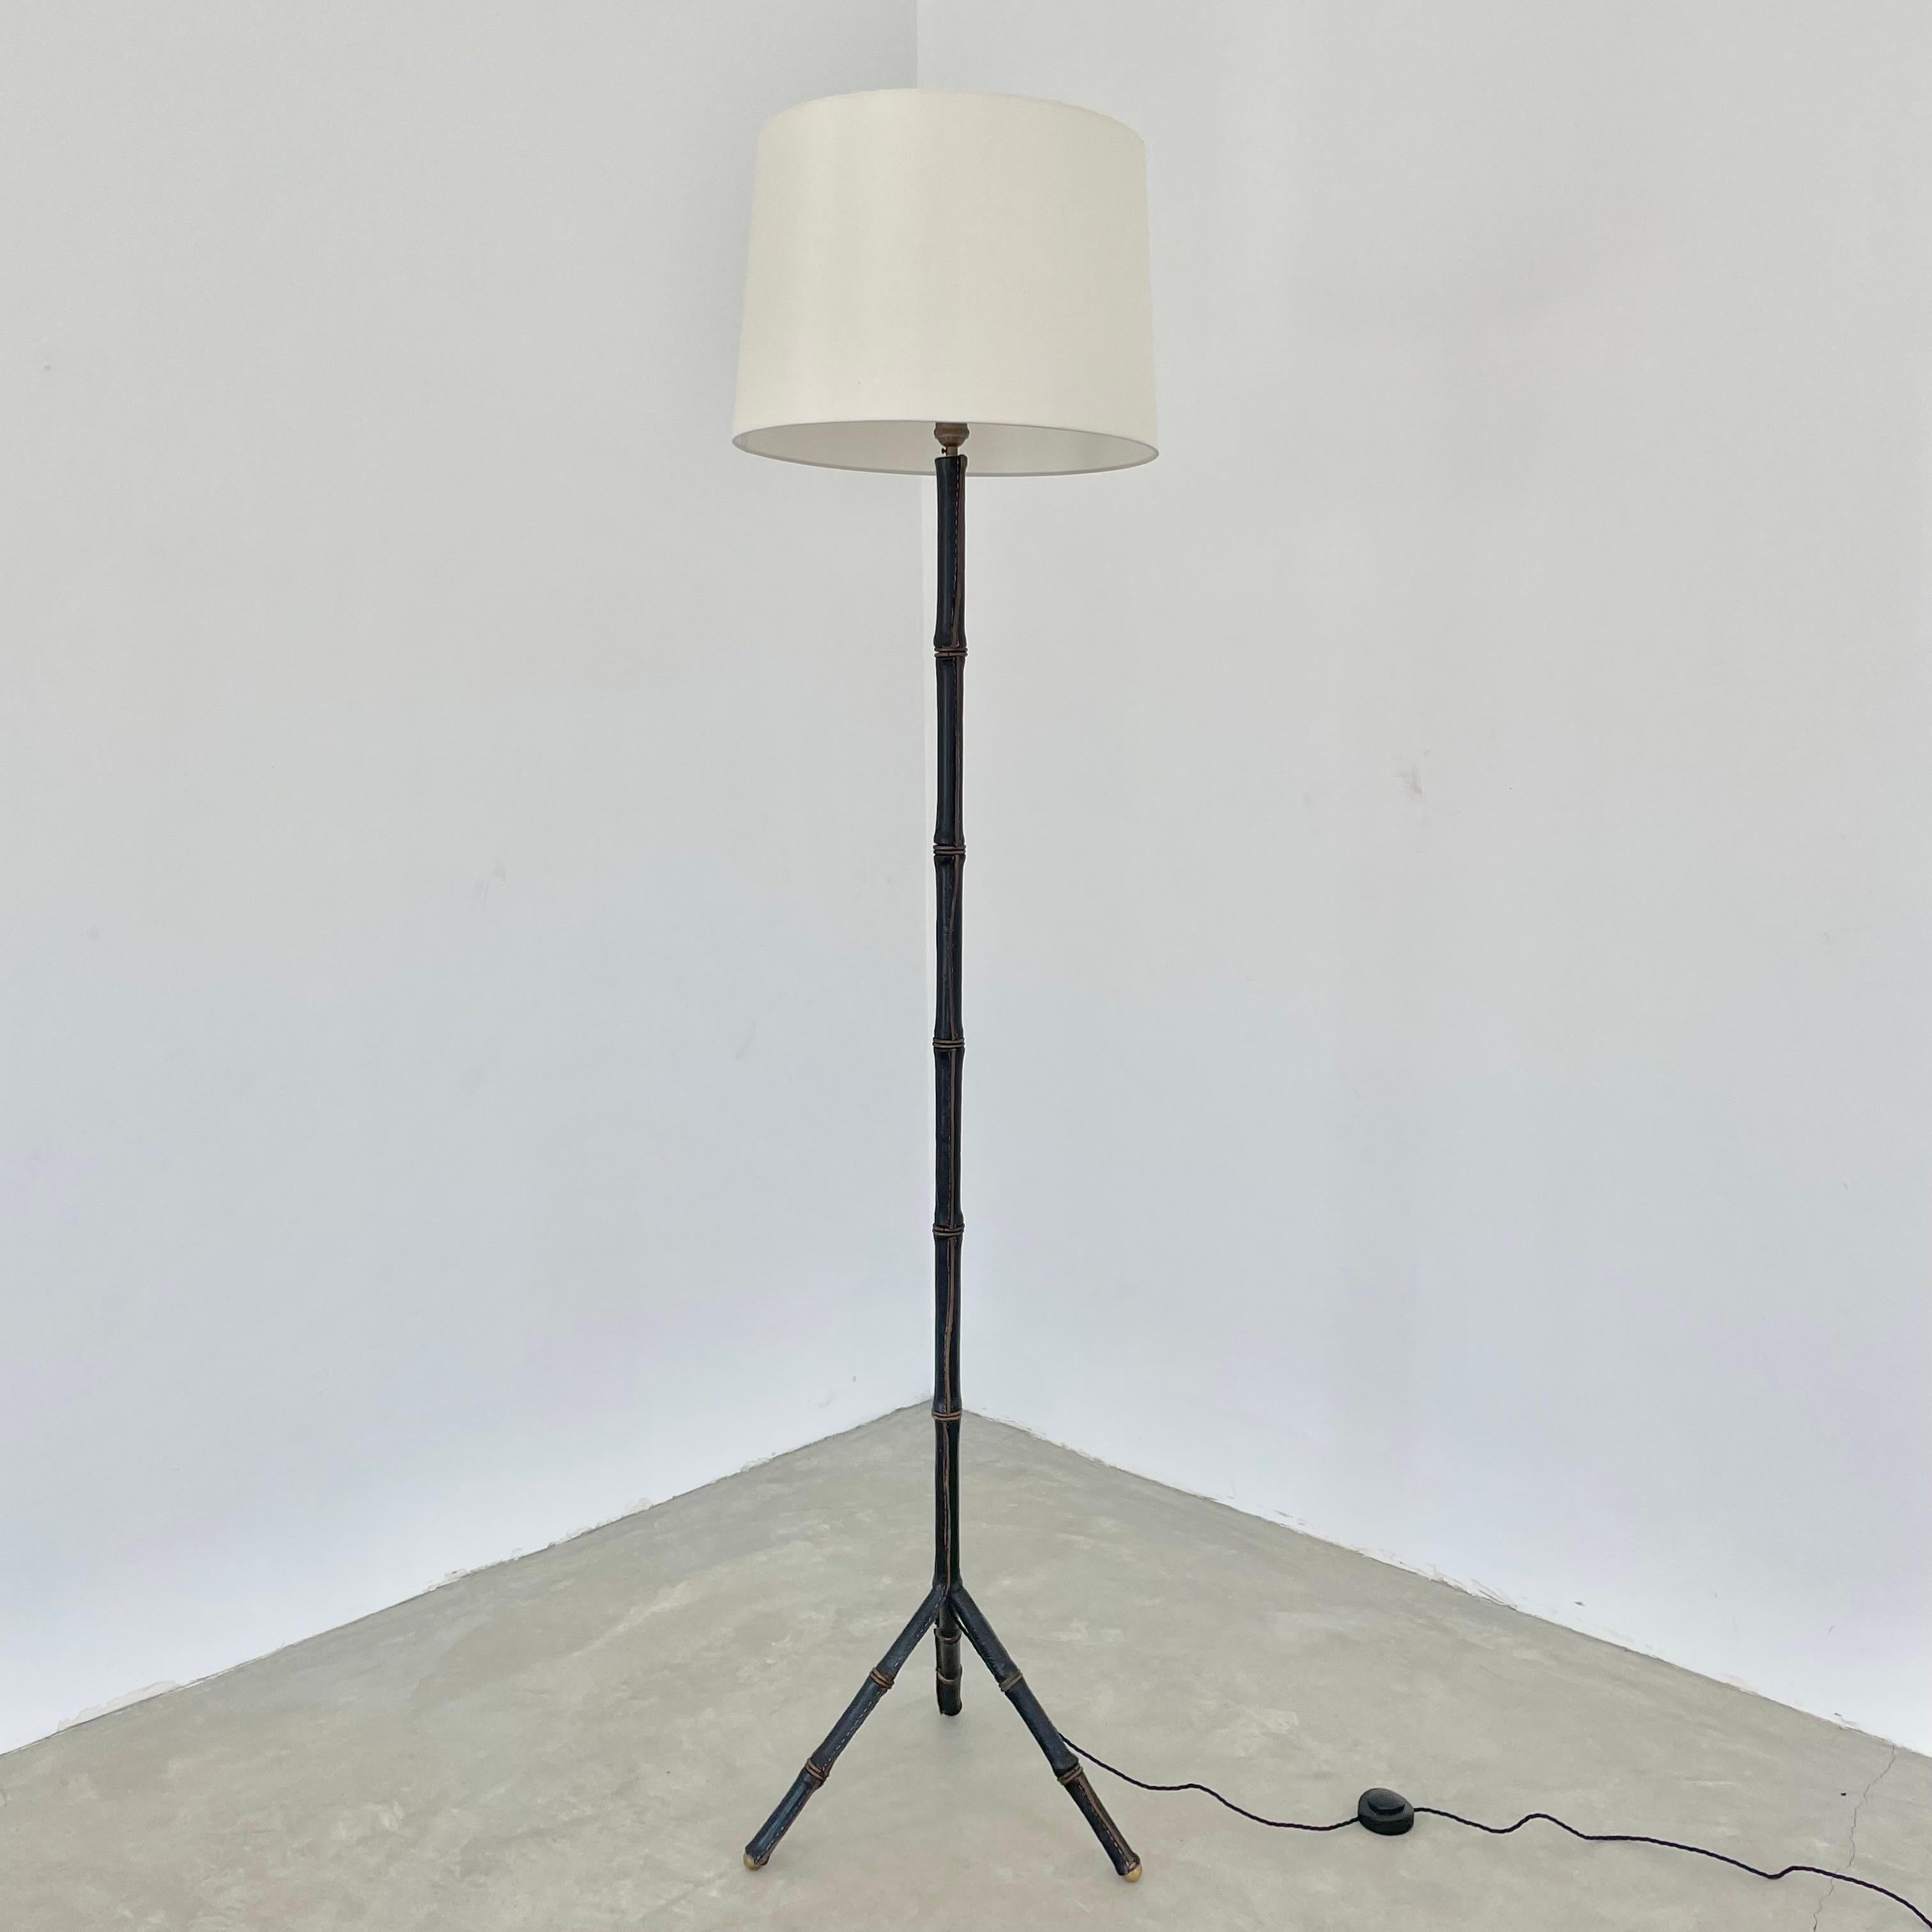 Handsome tripod floor lamp completely wrapped in a supple black leather by French designer Jacques Adnet. Made in France in the 1950s. Leather features brass ring accents up the entire length of the body and is wrapped in a way that gives a bamboo